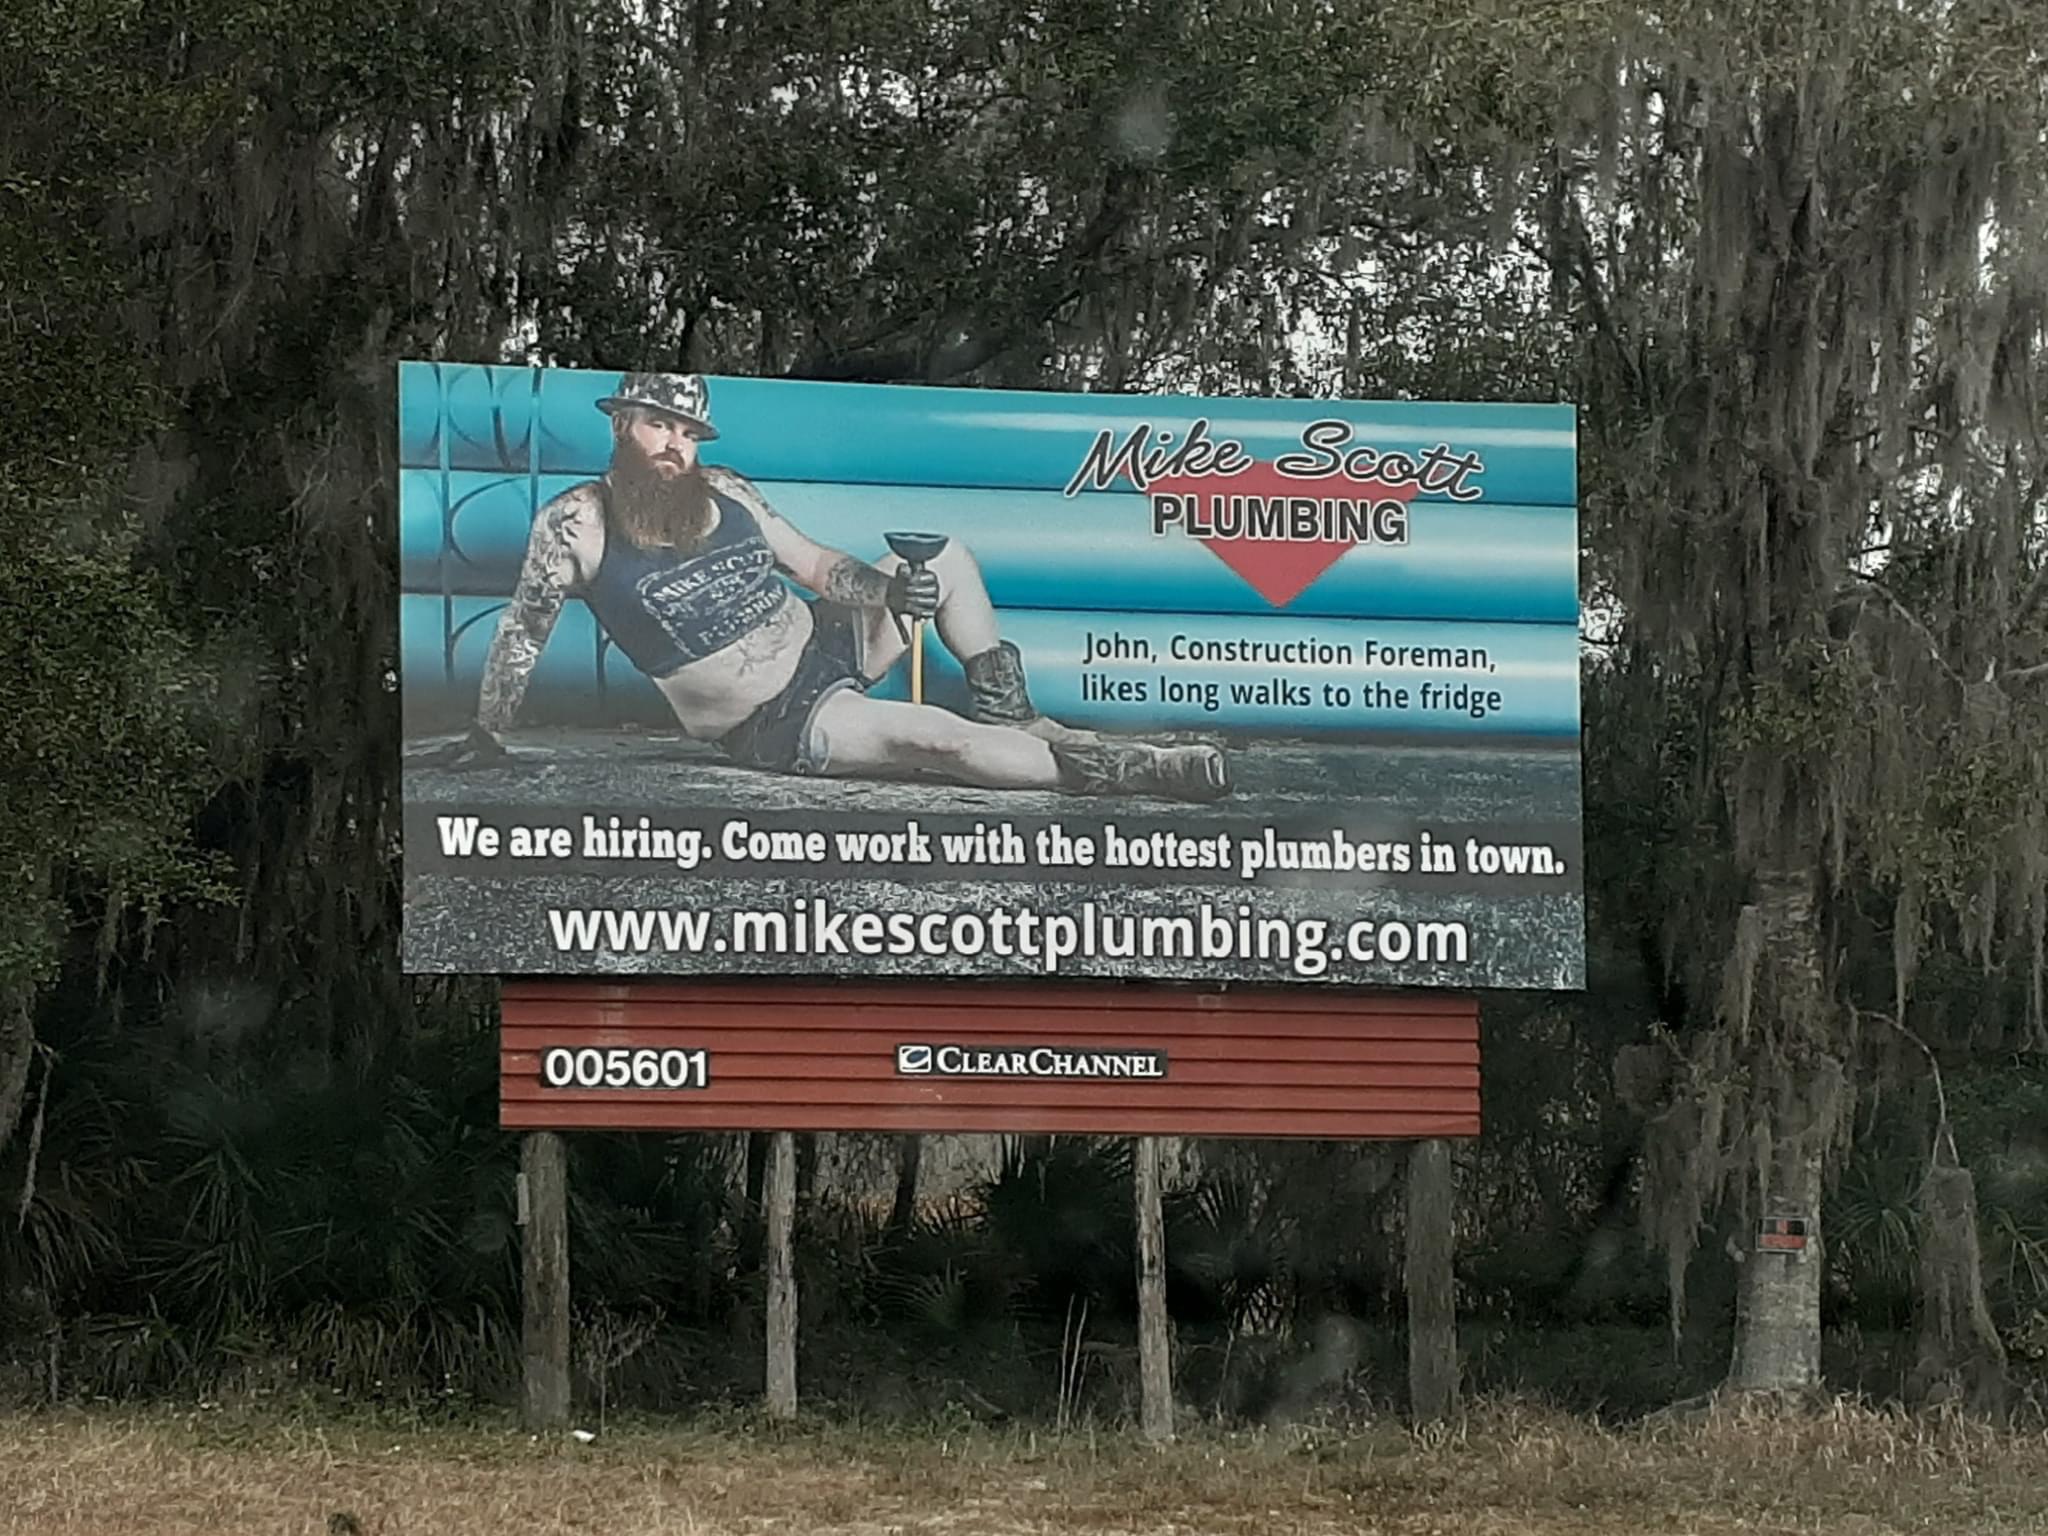 billboard - Mike Scott Plumbing John, Construction Foreman, long walks to the fridge We are hiring. Come work with the hottest plumbers in town. 005601 Clear Channel